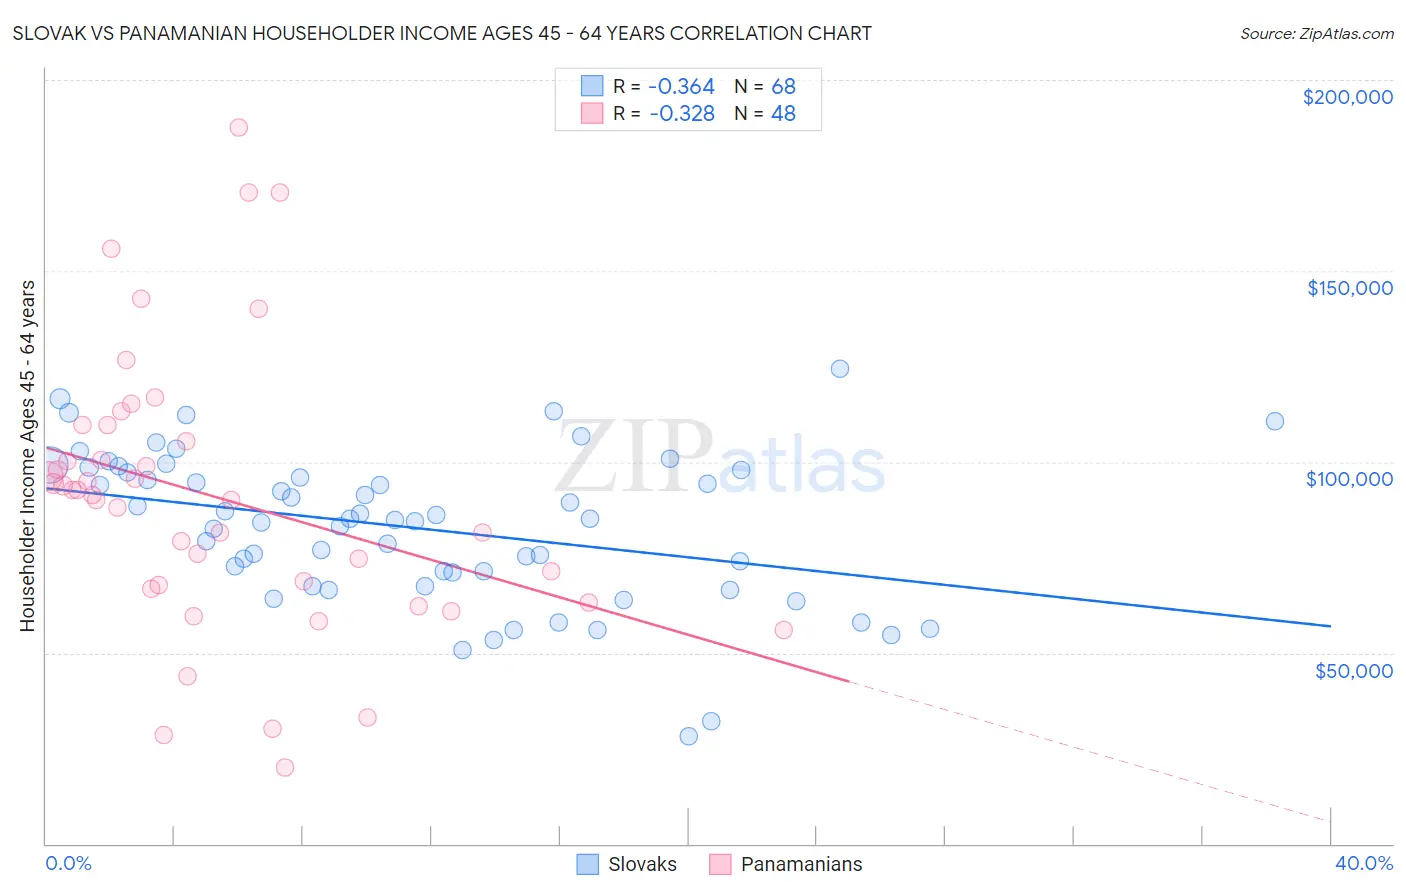 Slovak vs Panamanian Householder Income Ages 45 - 64 years